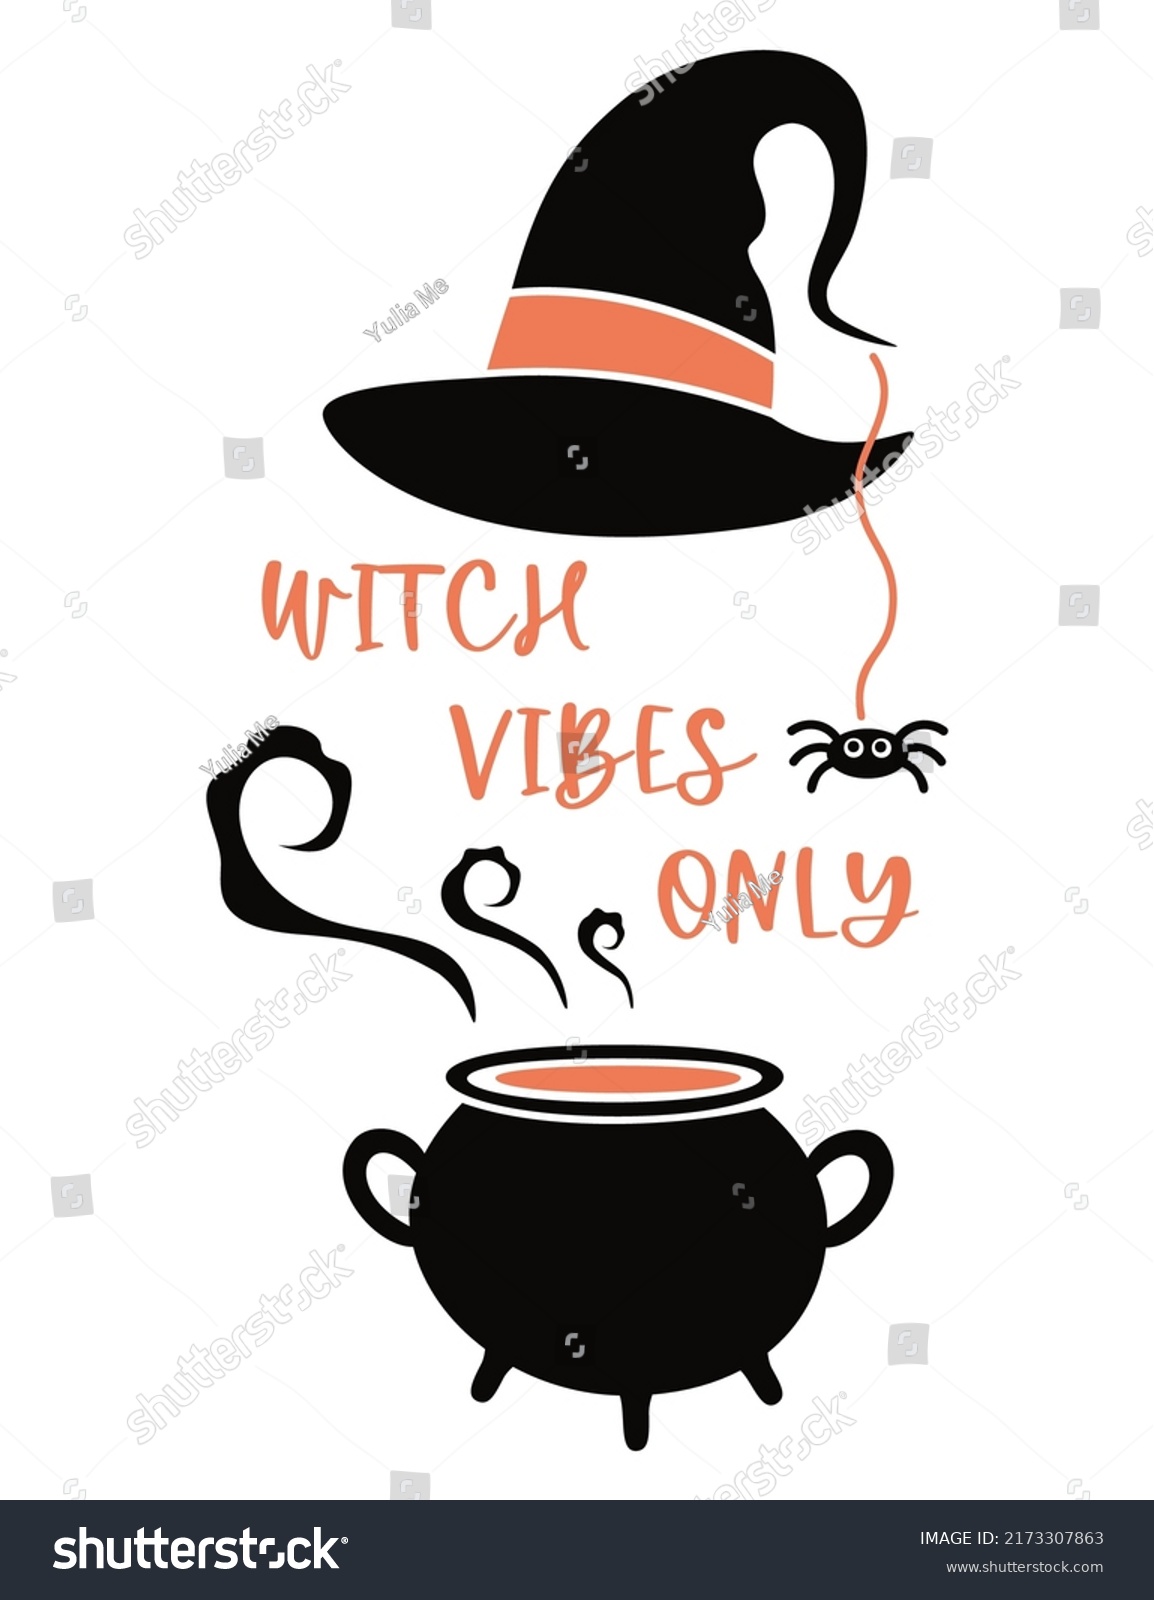 SVG of Halloween illustration with witch hat, spider and pot with potion. Witch vibes only poster.  svg